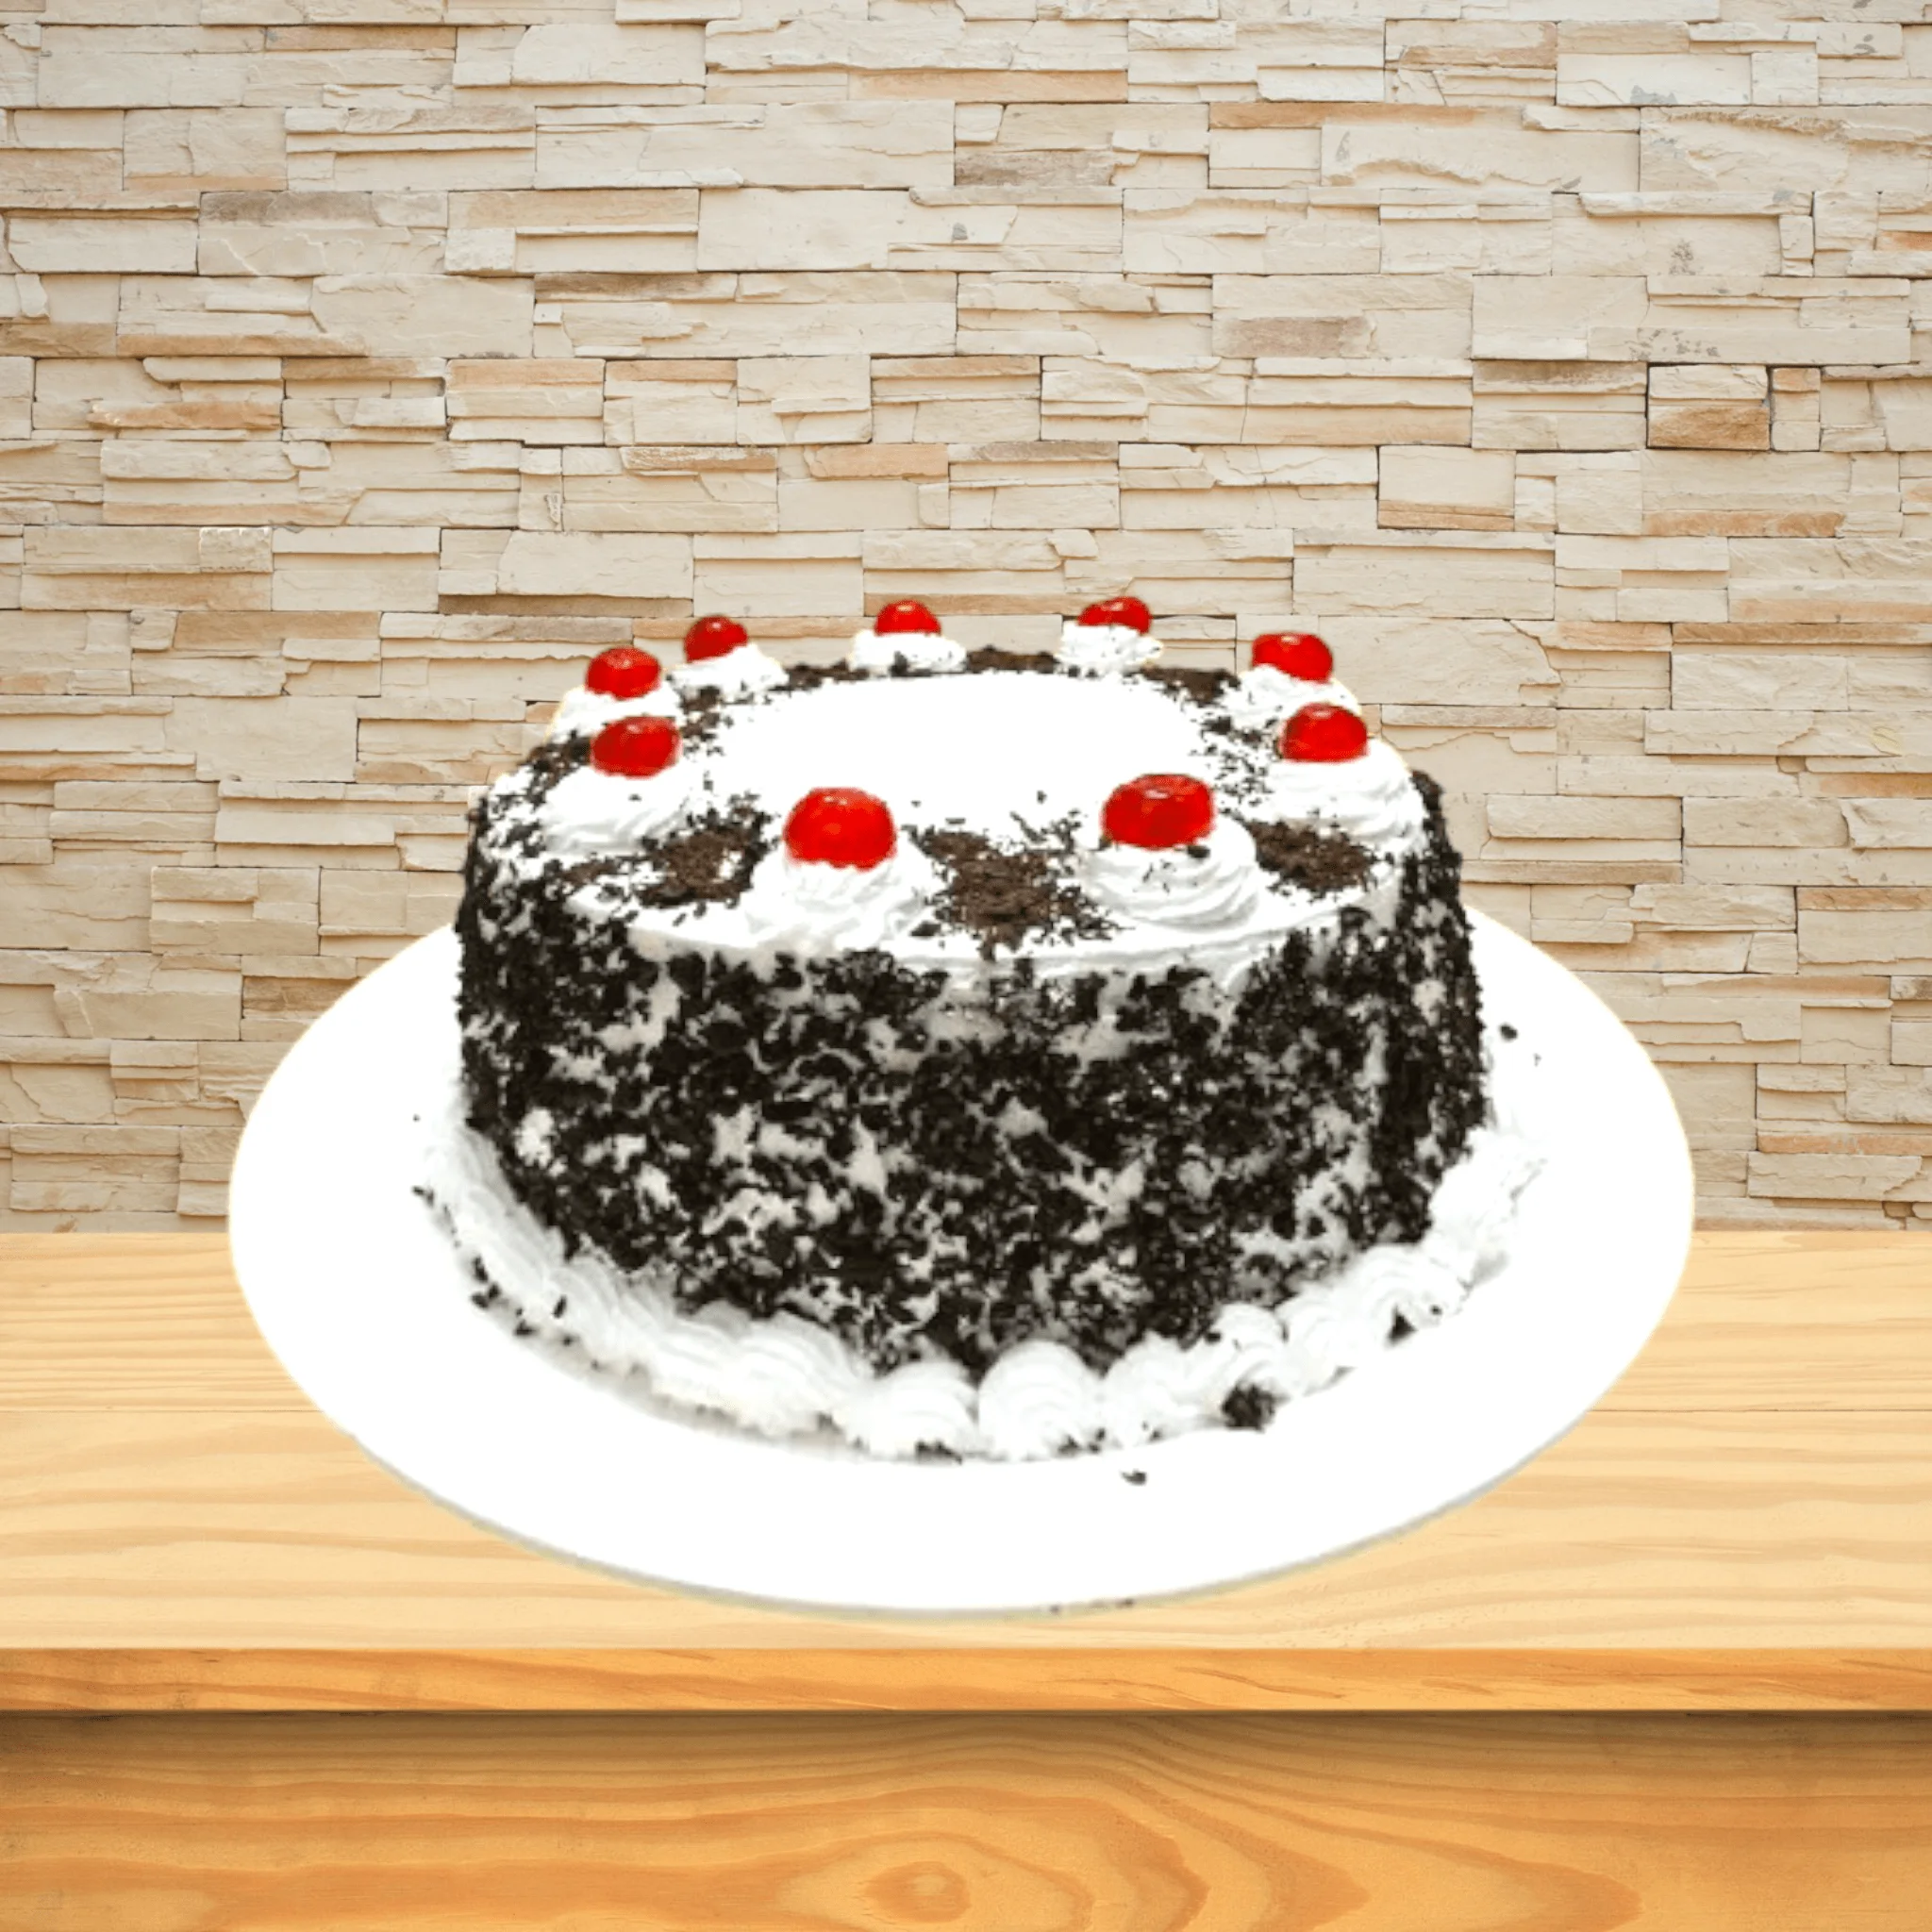 10 Christmas Cake Ideas For Your Holiday Dessert Table – House of Andaloo